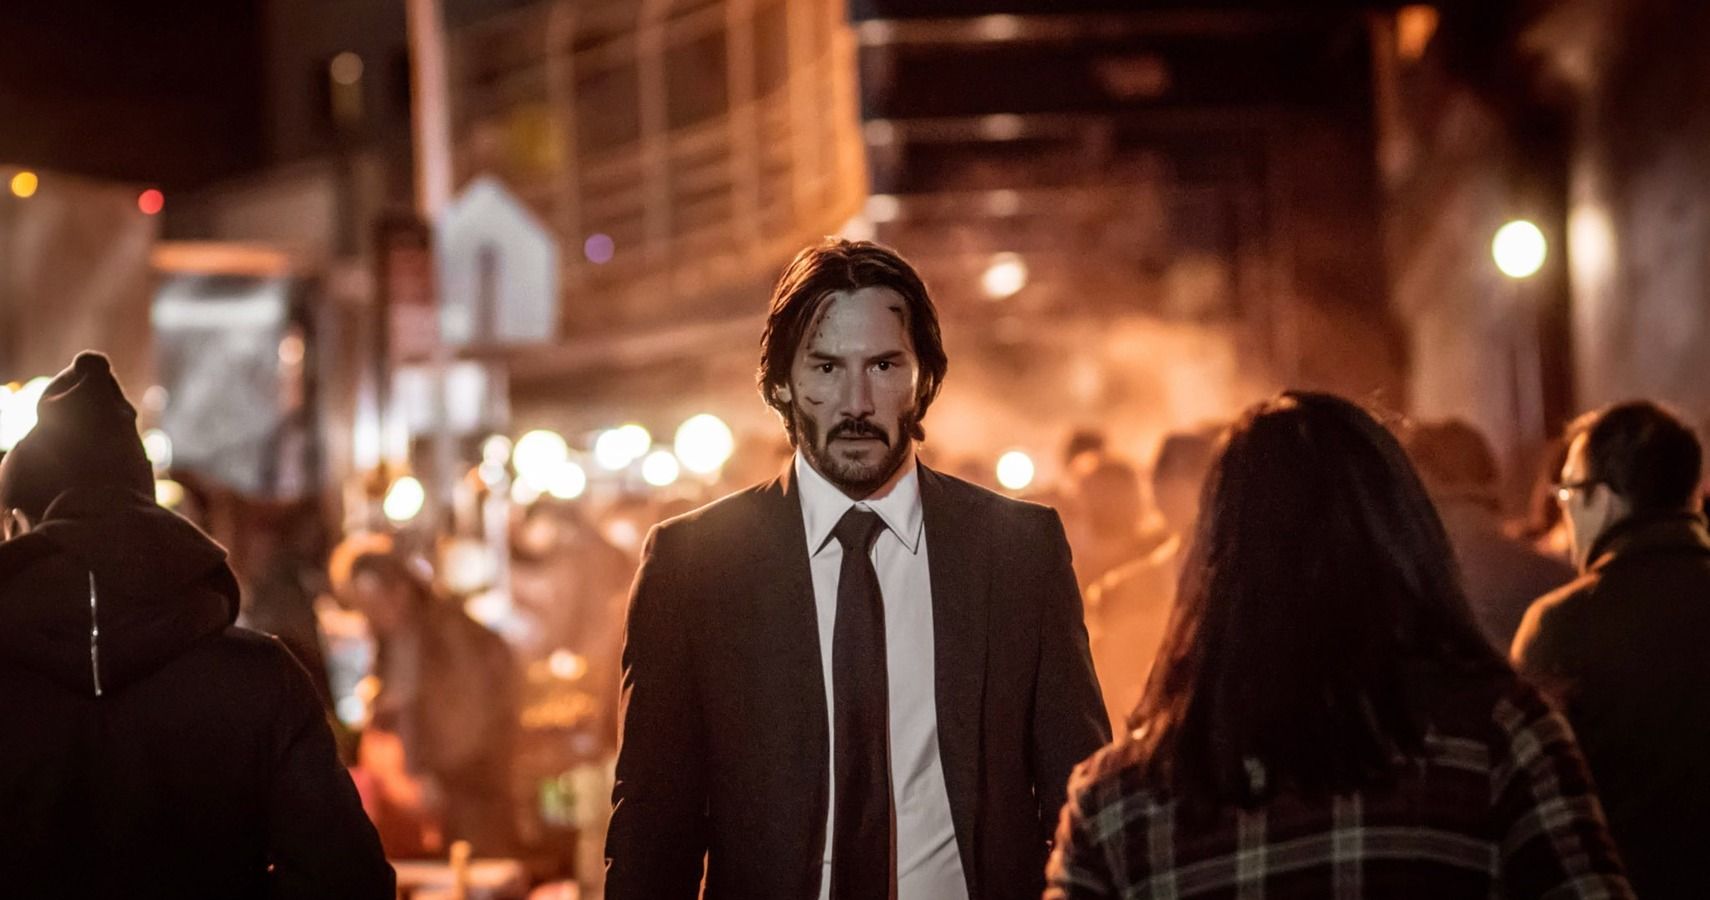 John Wick 3: 5 Things We Loved (& 5 Questions We Still Have)
